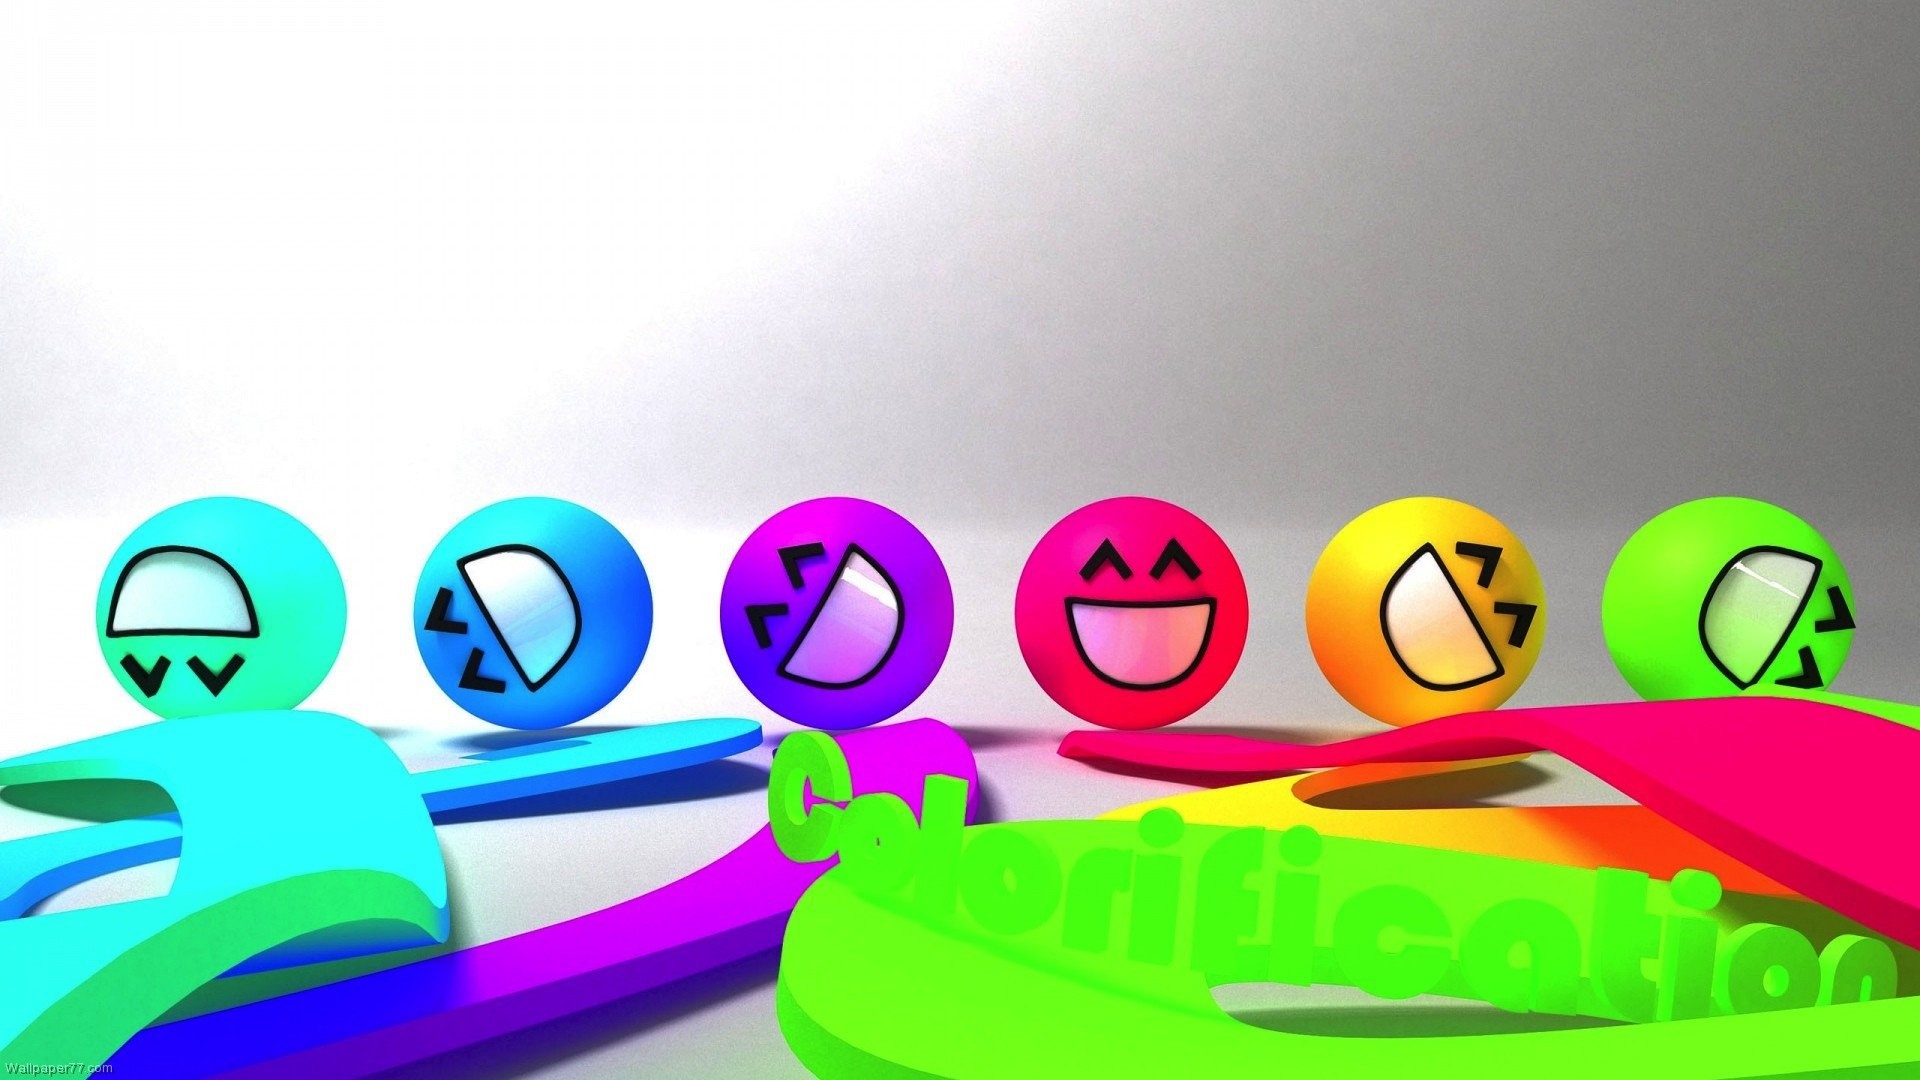 1920x1080 Smiley Face Wallpaper 403684. TAGS: Fun Colorful ...